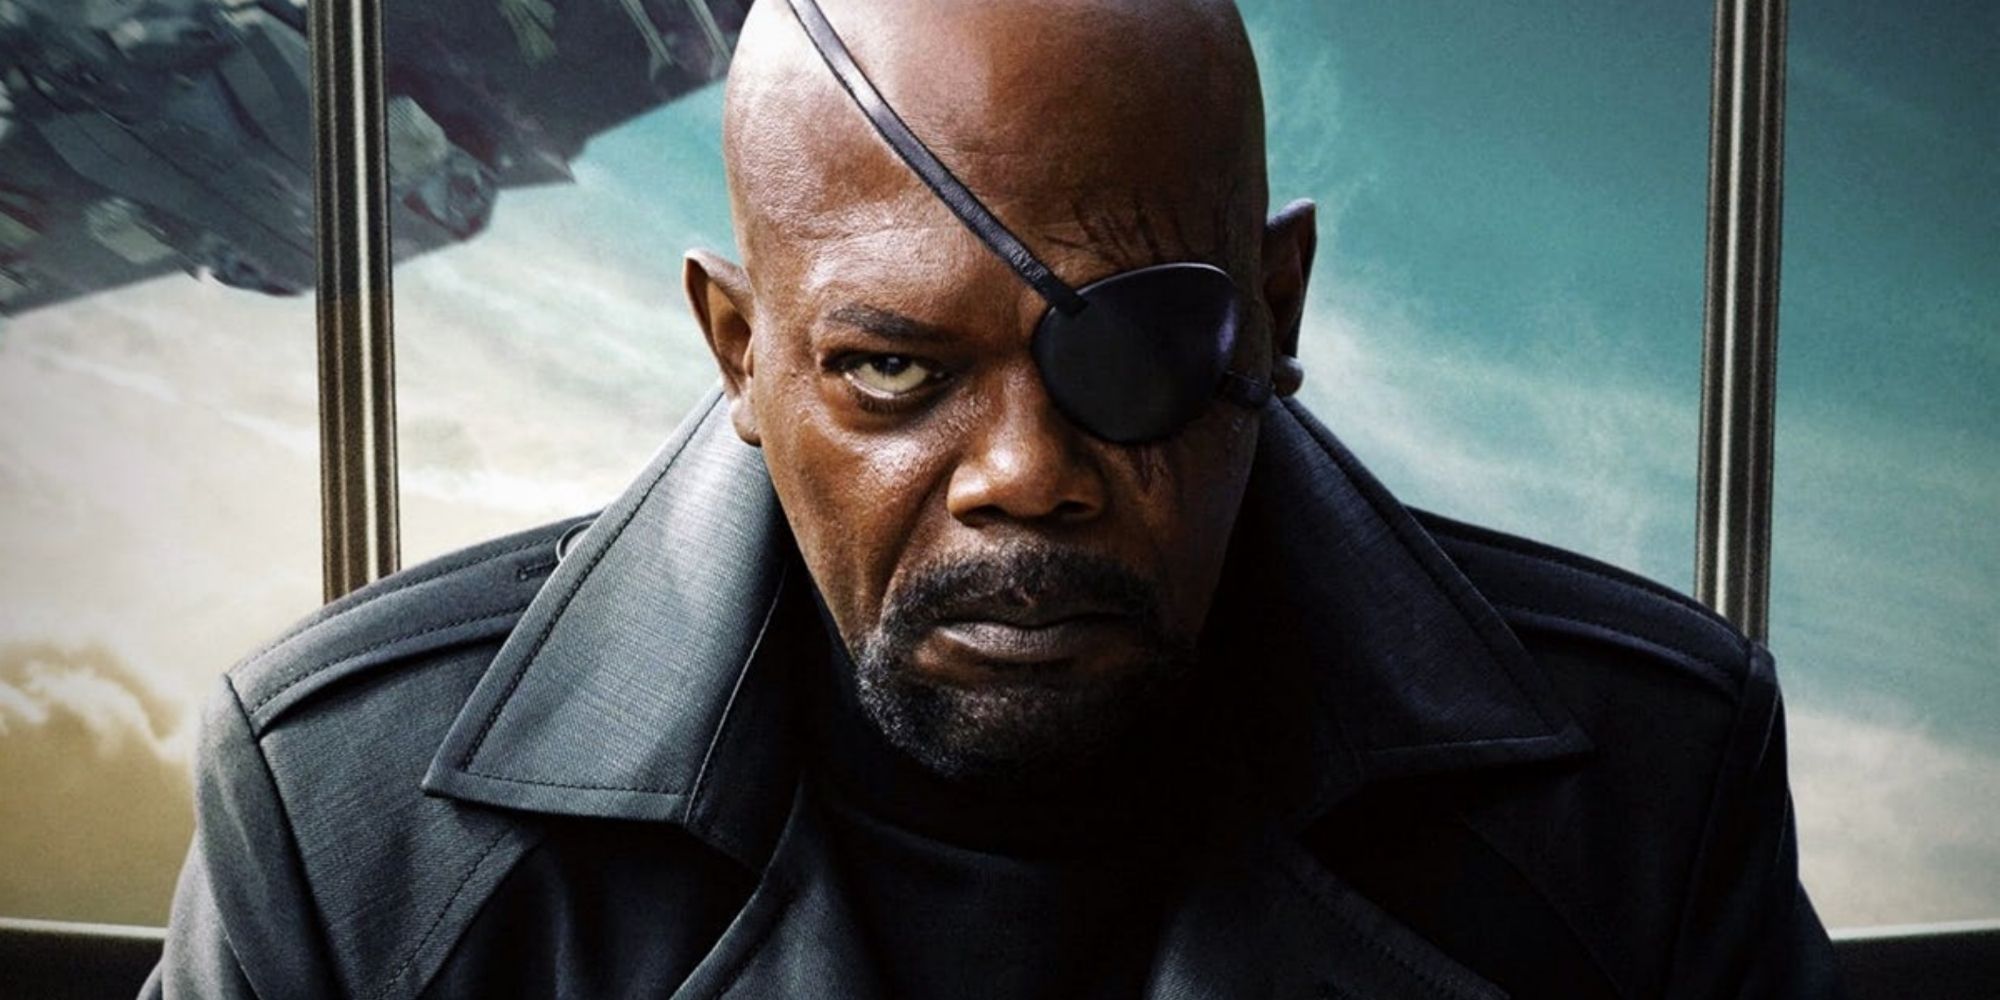 Nick Fury makes a solemn expression in Captain America: The Winter Soldier.